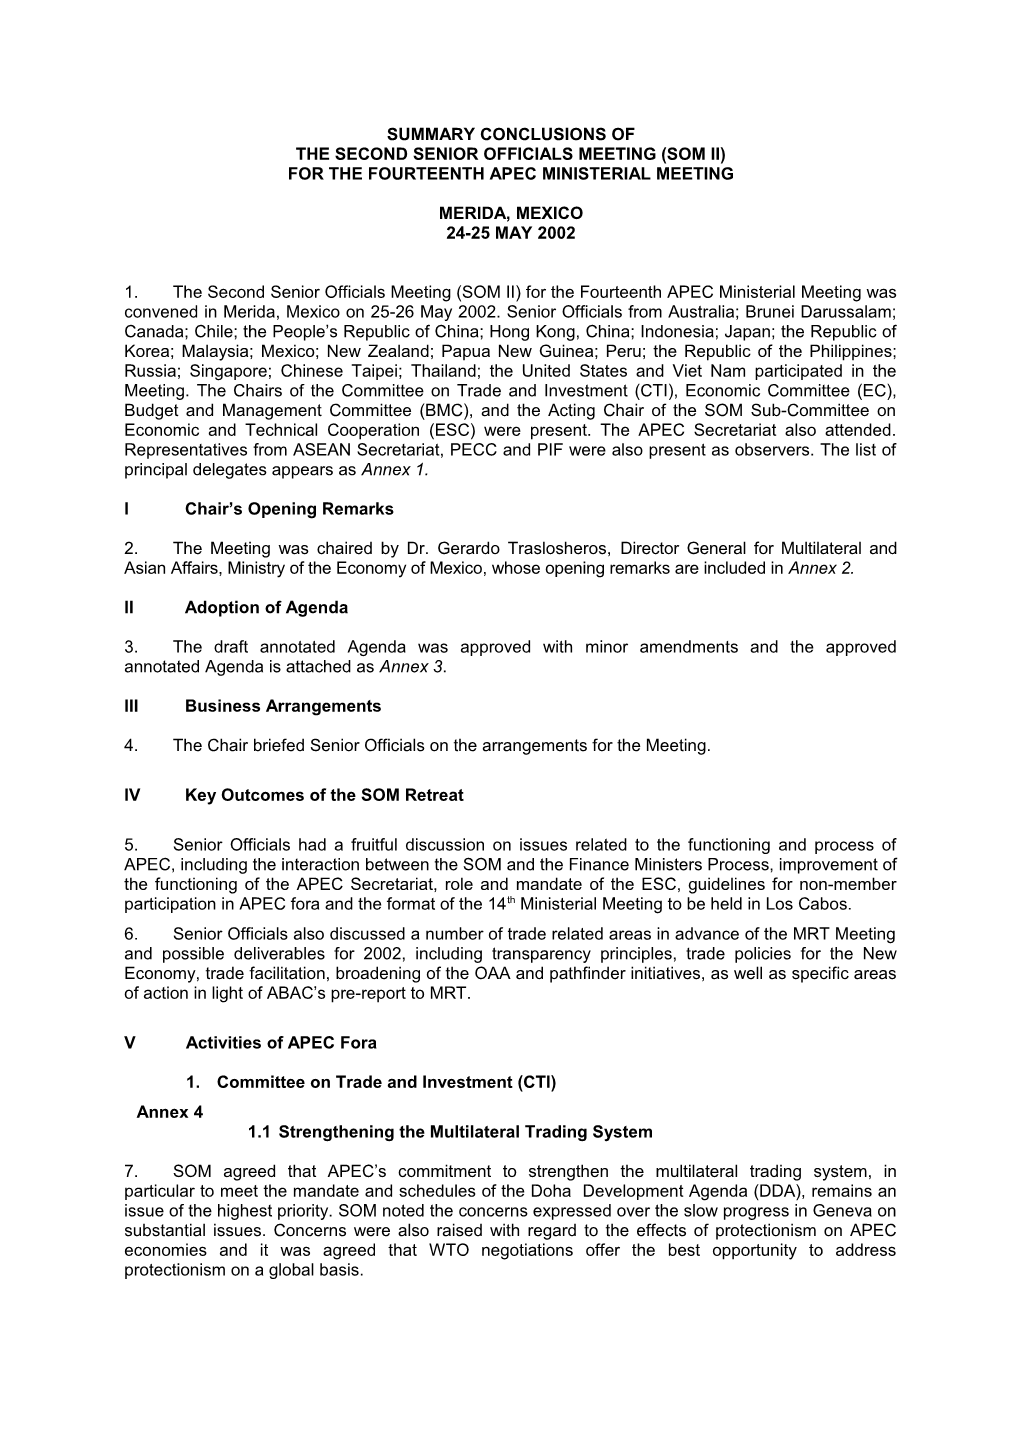 Final List of Documents and Classification